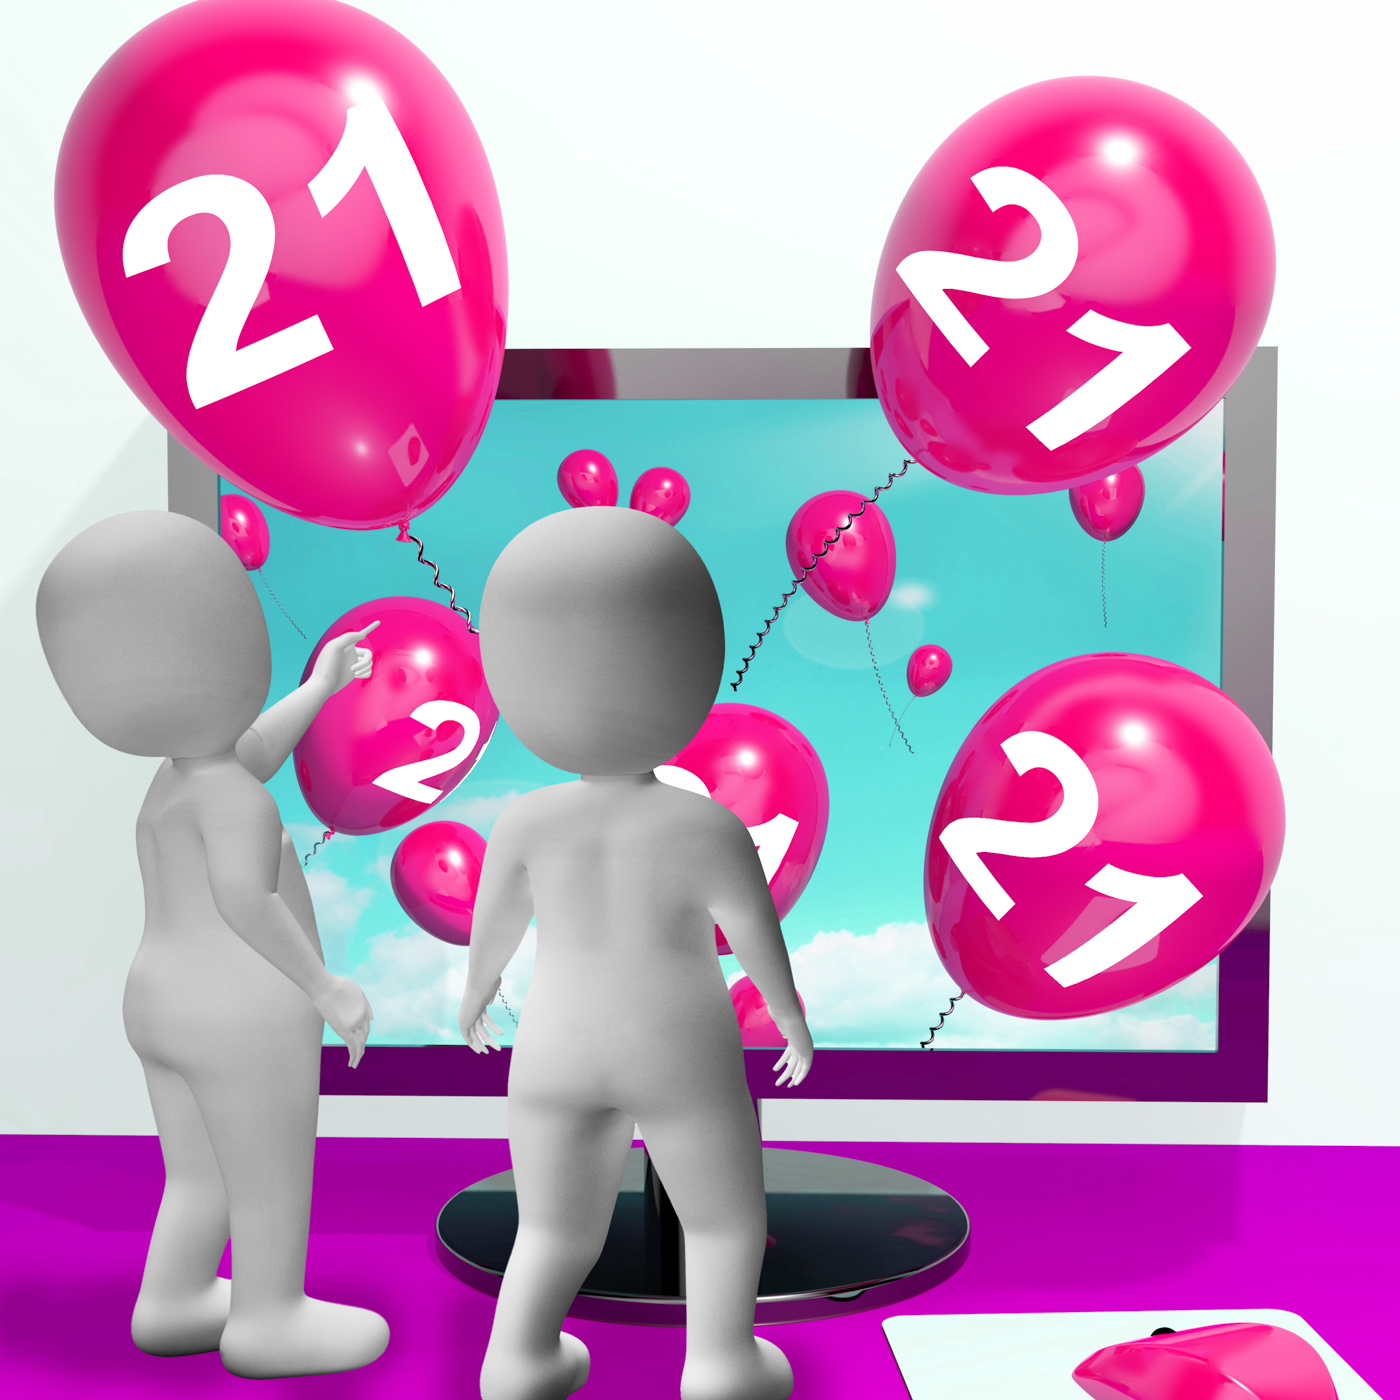 Number 21 Balloons from Monitor Show Online Invitation or Celebration, 21, Happy, Web, Twenty-one, HQ Photo